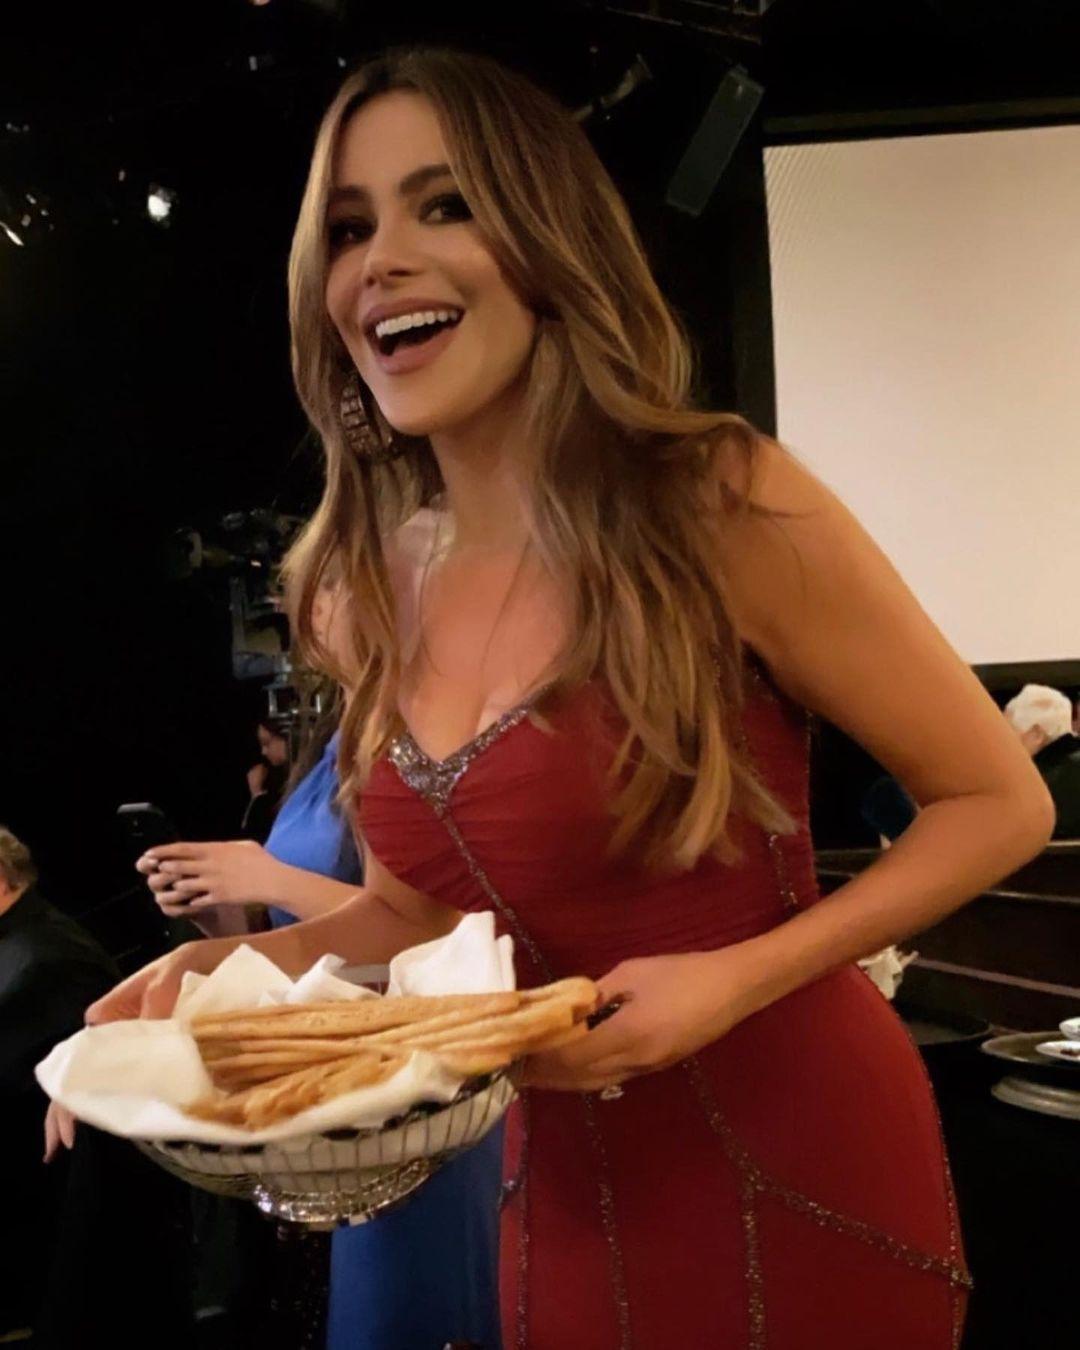 Sofia Vergara, 48, looks very different in throwback images